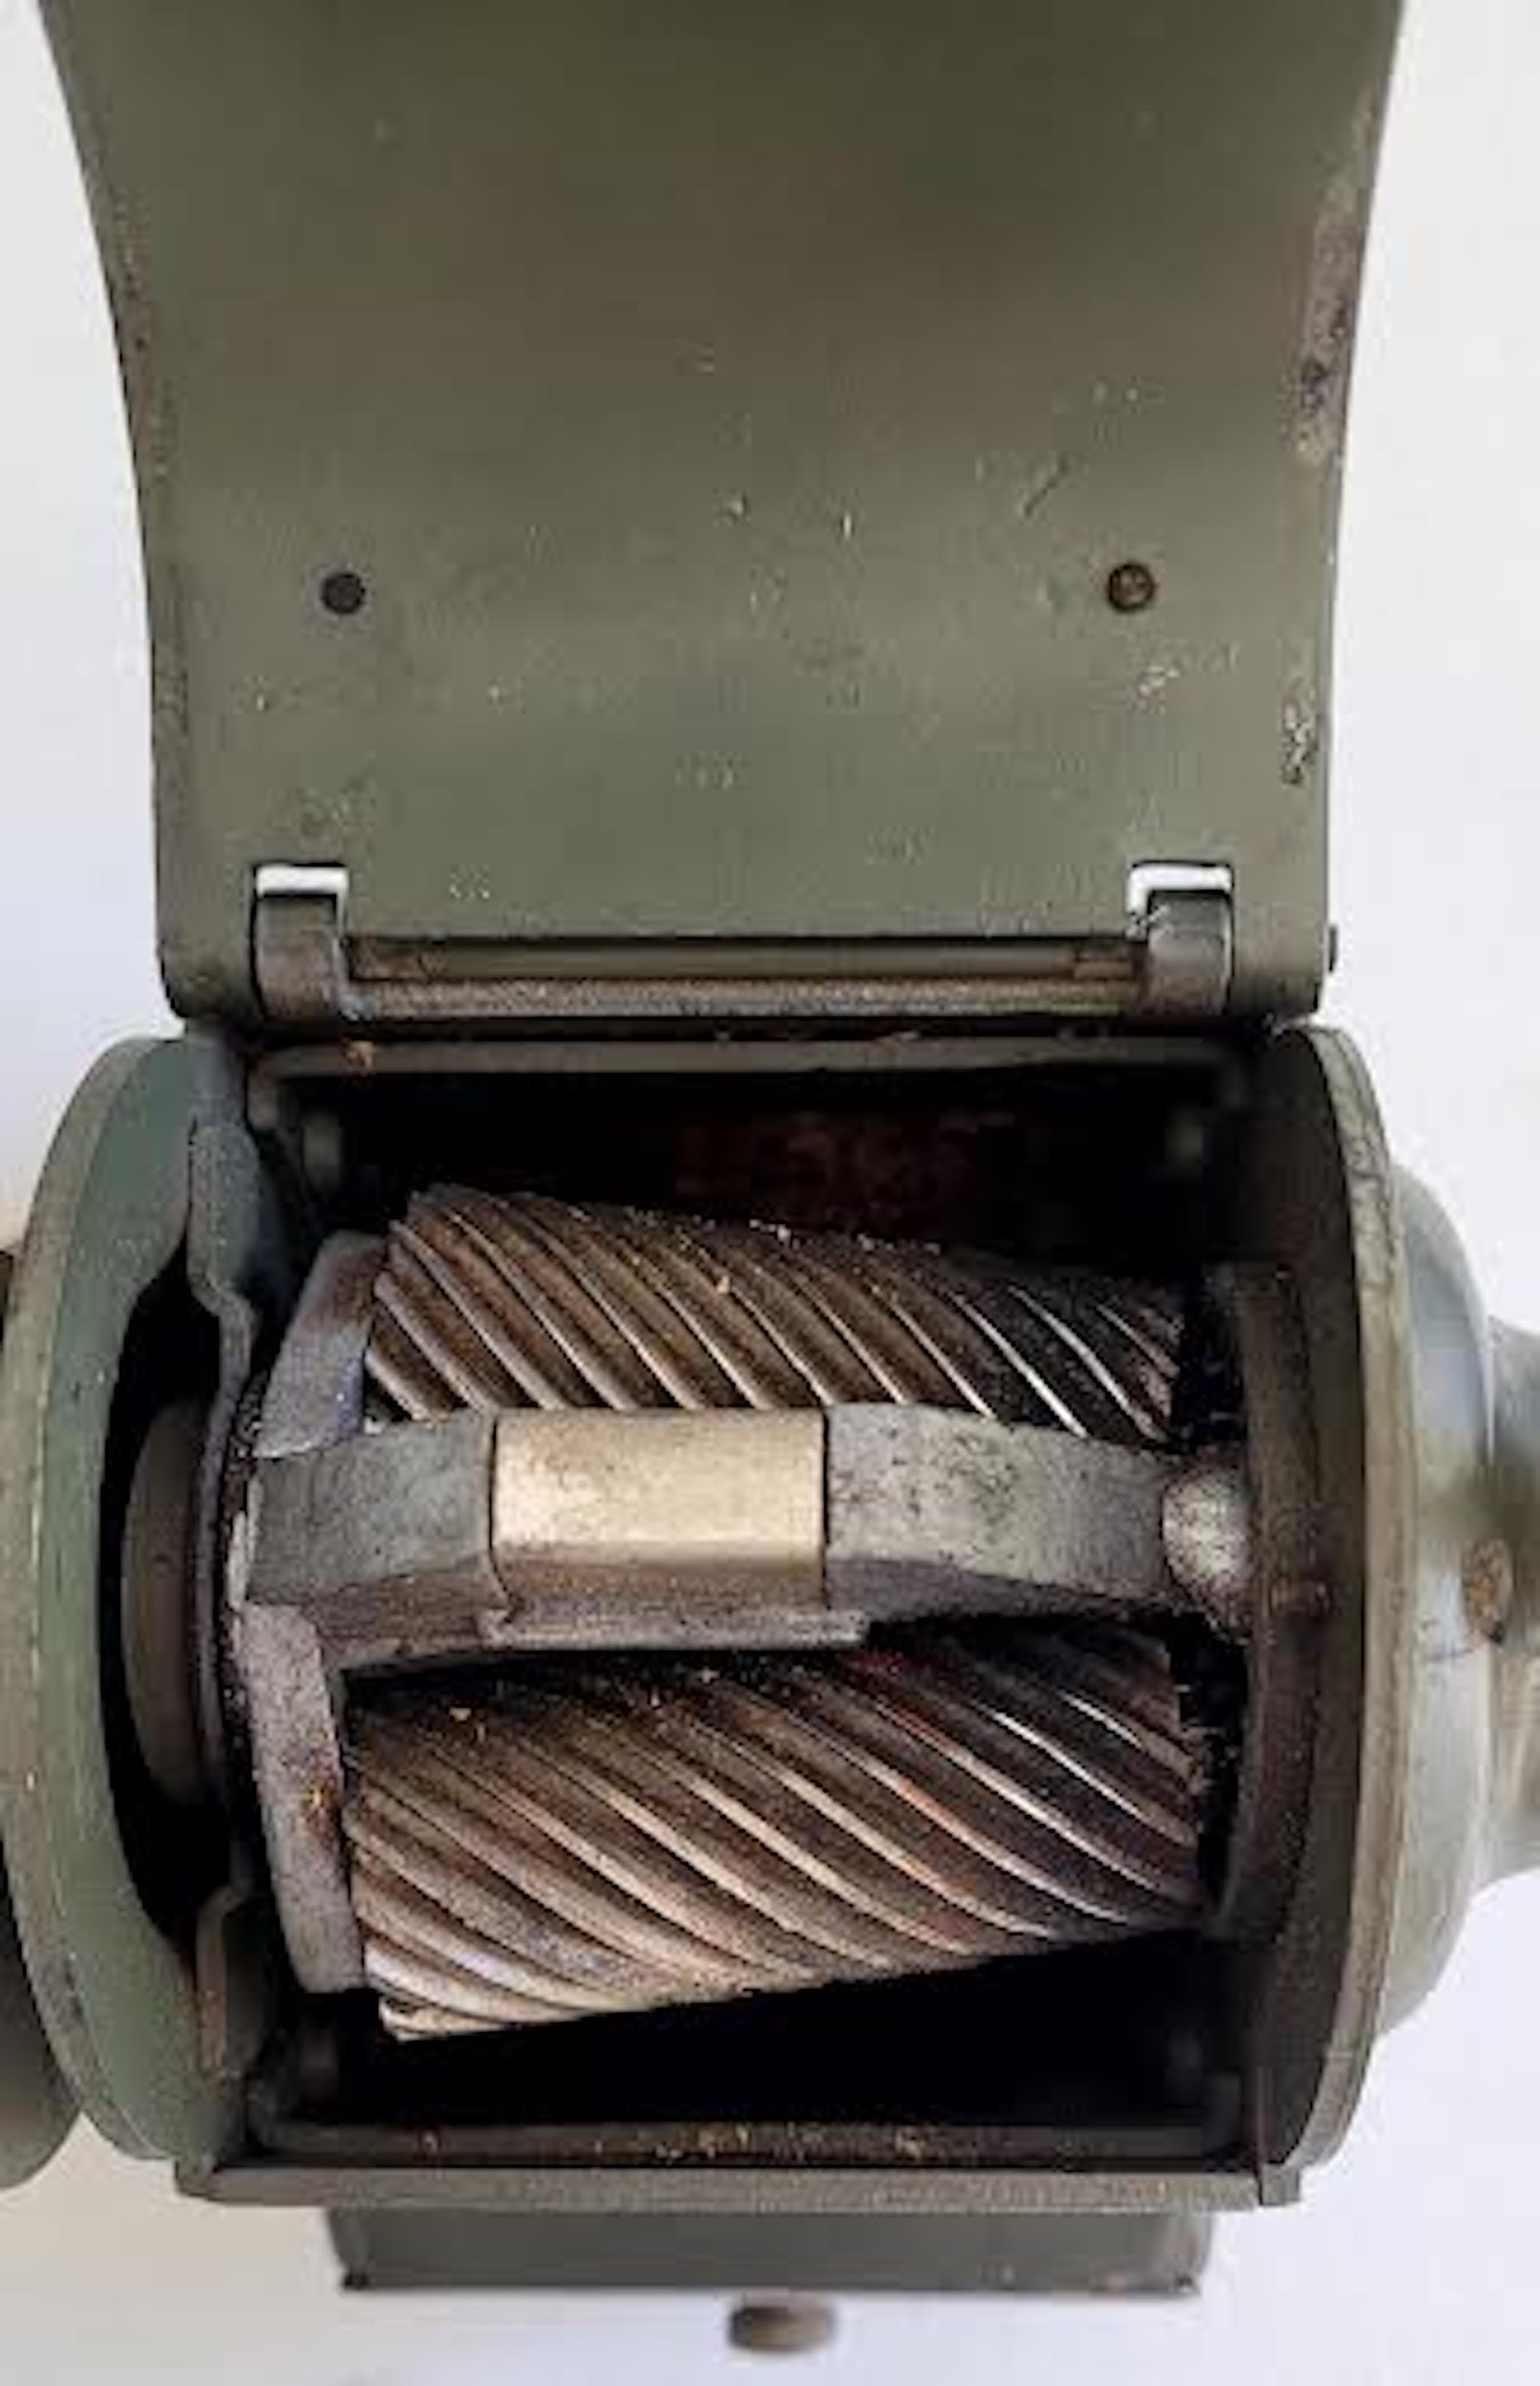 Climax No. 3 Industrial Automatic Pencil Sharpener 4